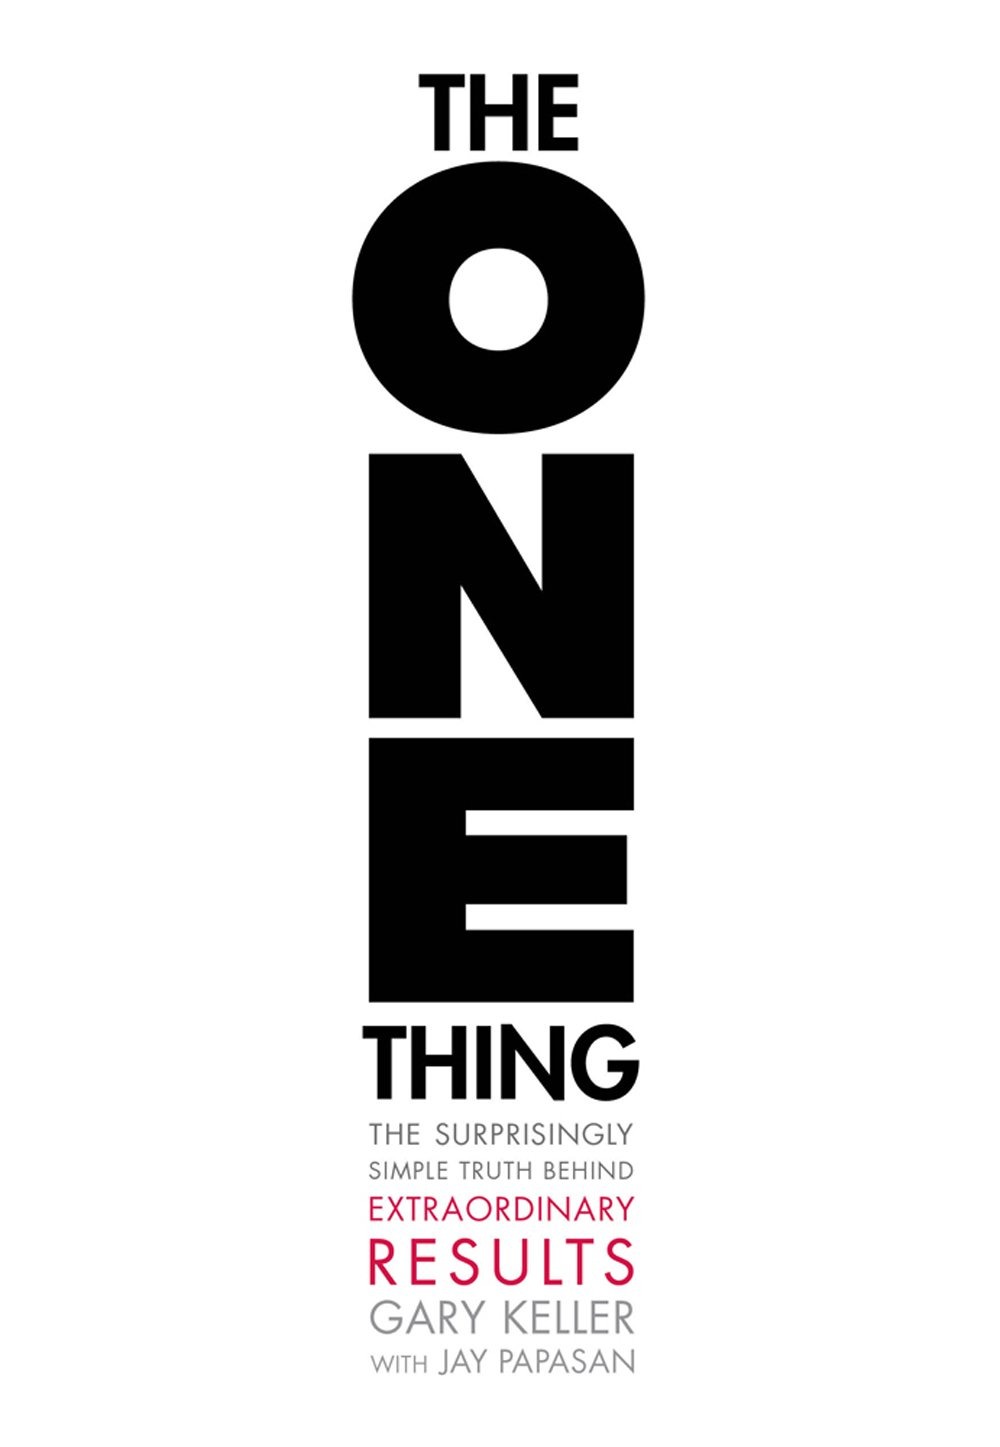 The ONE Thing Summary